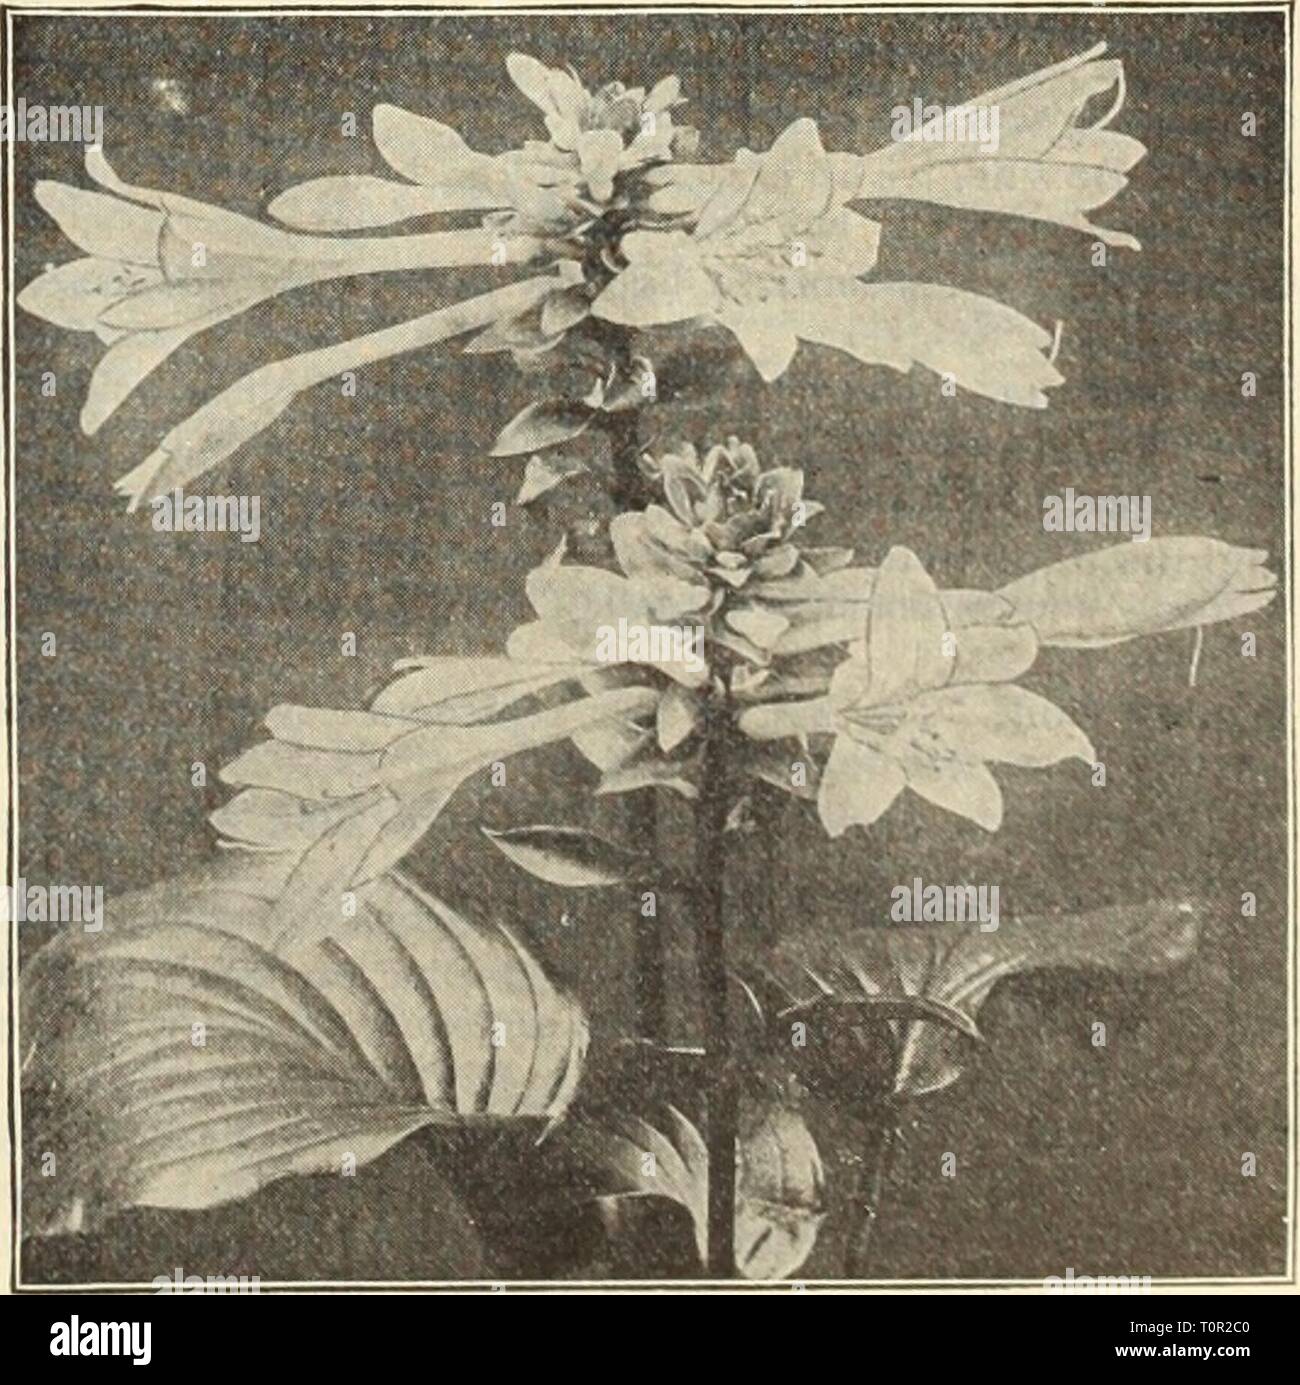 Dreer's autumn catalogue 1914 (1914) Dreer's autumn catalogue 1914  dreersautumncata1914henr Year: 1914  Digitalis (Foxglove). durina DIGITALIS Foxglove). The Foxglove, old-fashioned, dignified and statel their period of flowering dominate the whole garden. Ciloxinaeflora {Gloxinia-flowered). A beautiful strain of finely-spotted varieties. We offer them in White, Furph-, Lihic, Rose or Mixed. Ambigua, or Grandiflora. Showy flowers of pale yellow, veined brown, Lanata. Dense spikes of odd-looking flowers; corolla gray, with creamy-white tips. 15 cts. each; $1..')0 per doz.; $10.00 per loO. EUPA Stock Photo